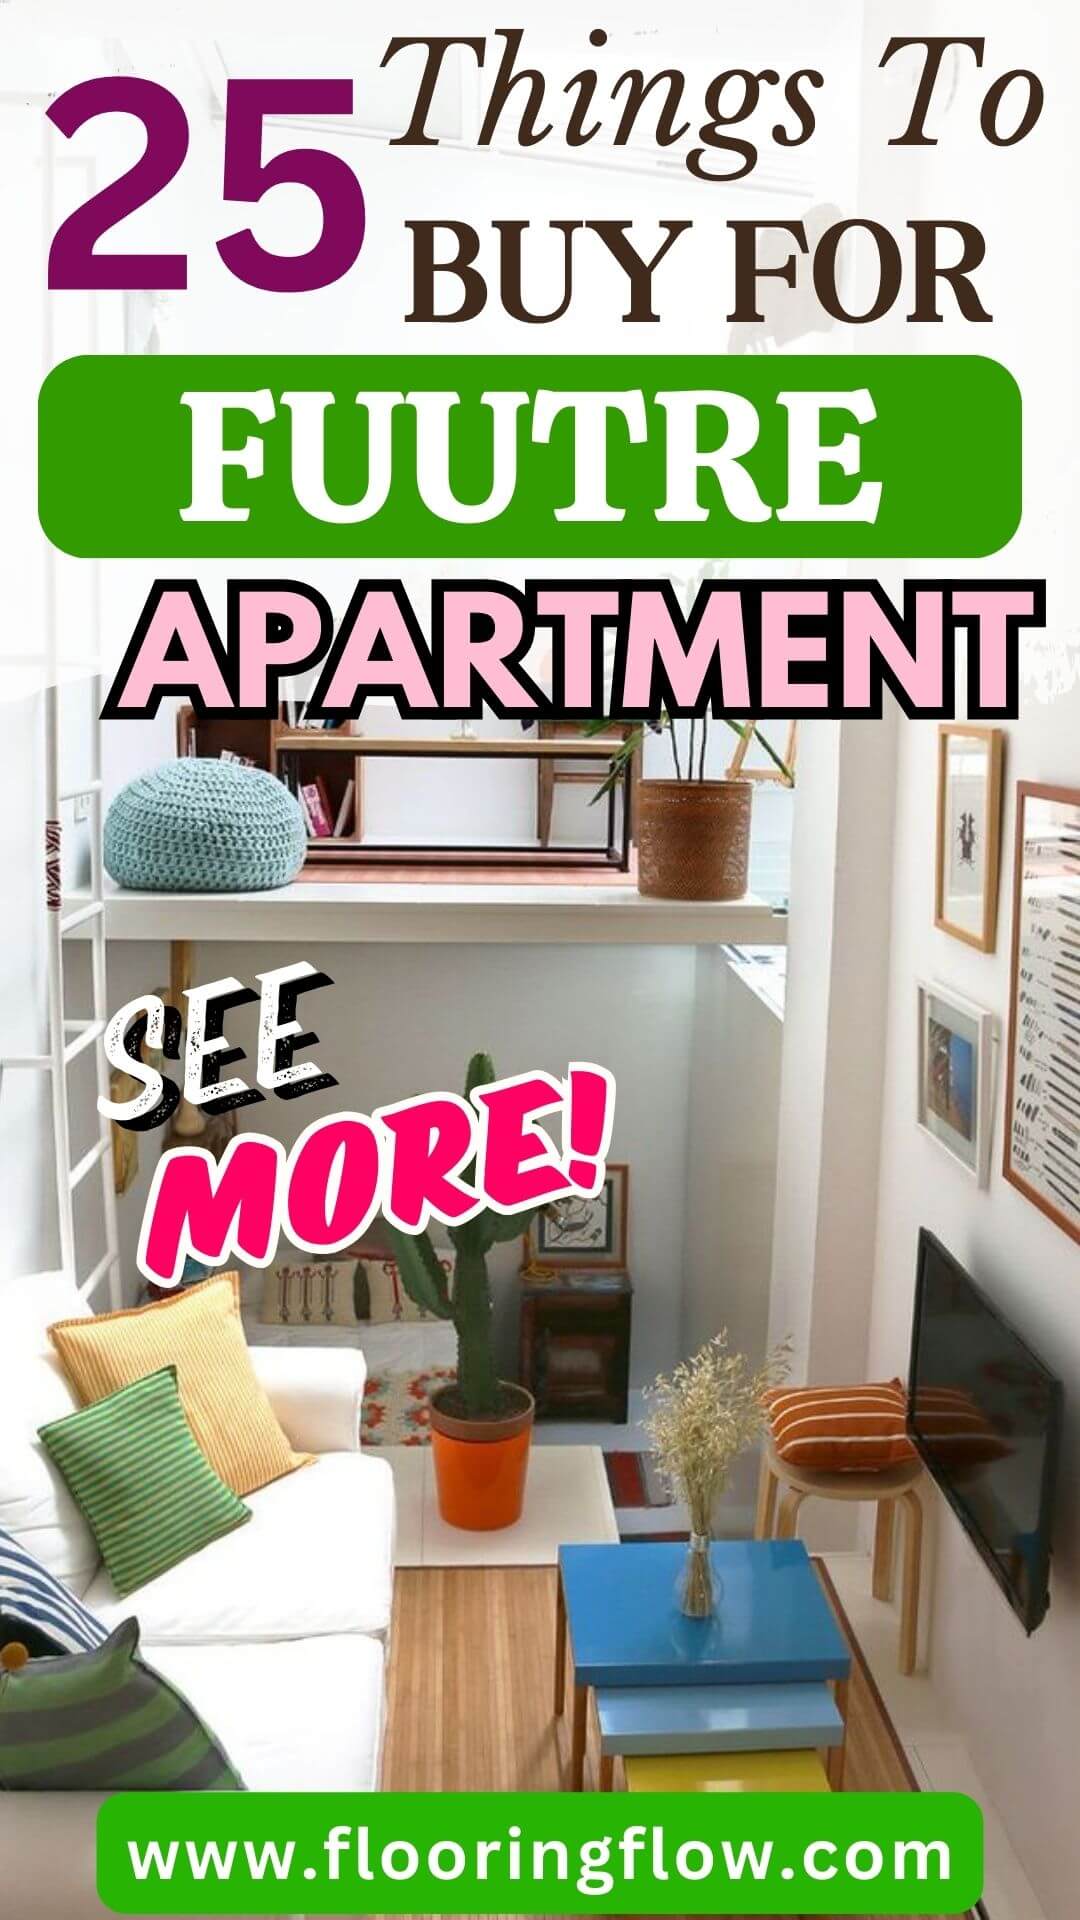 Things To Buy For Future Apartment